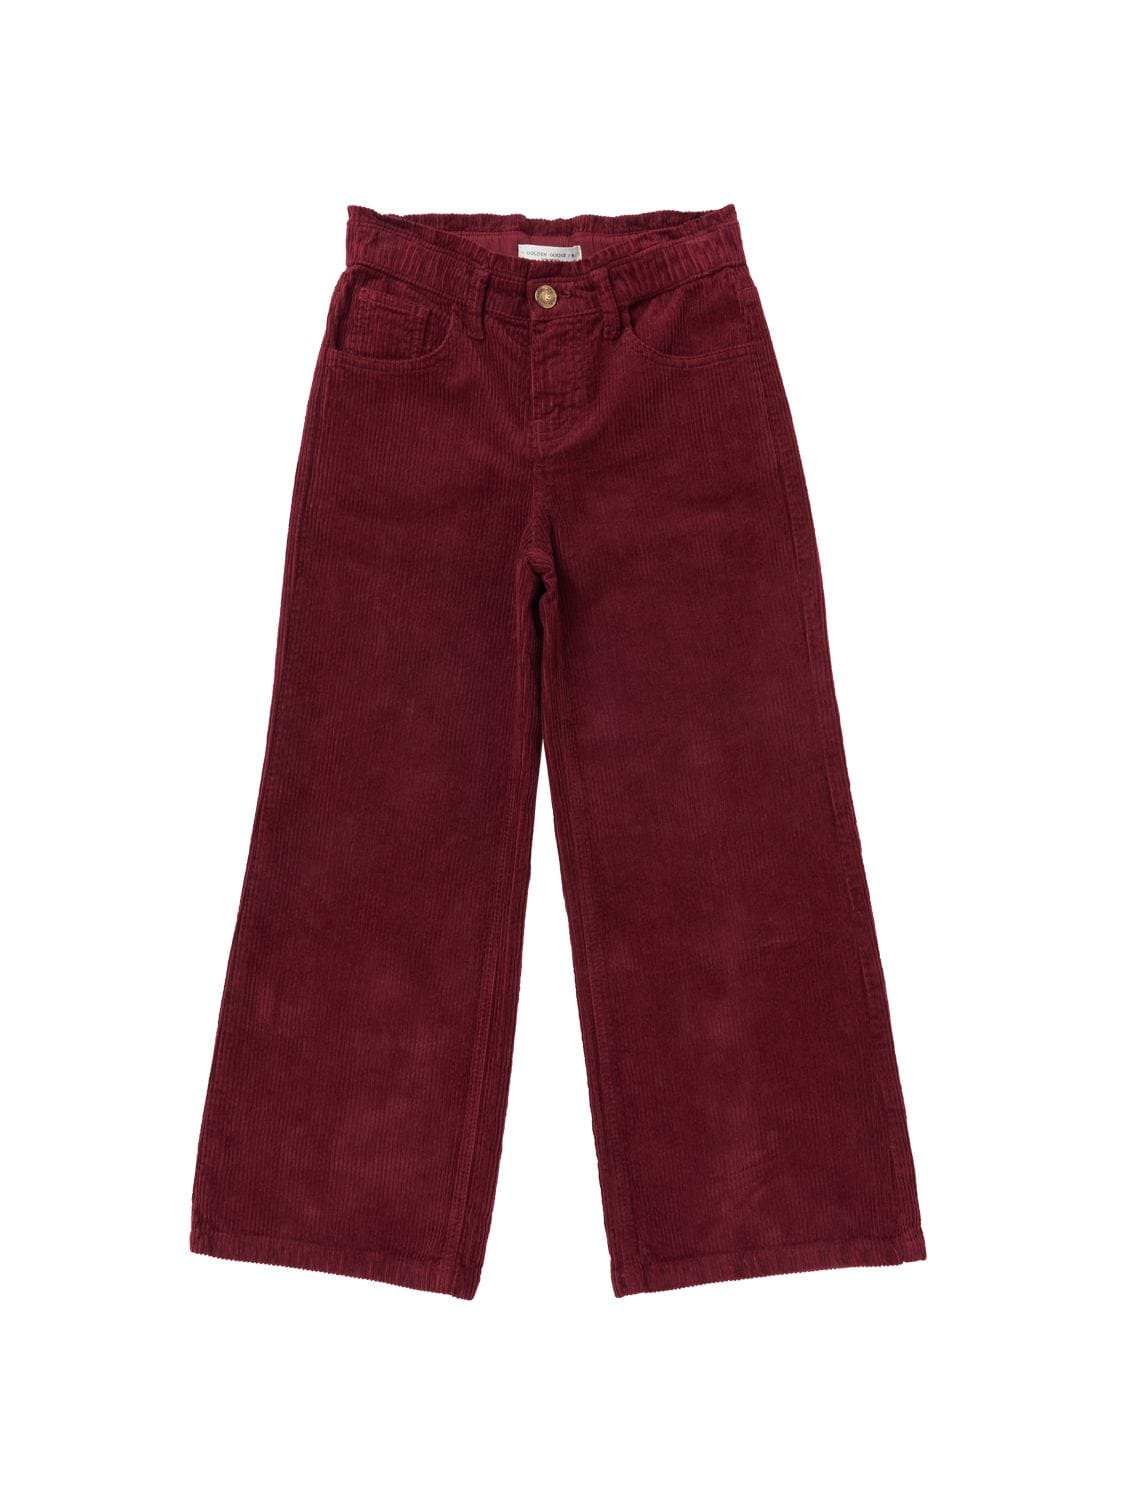 Golden Goose Kids' Embroidered Cotton Corduroy Pants In Bordeaux